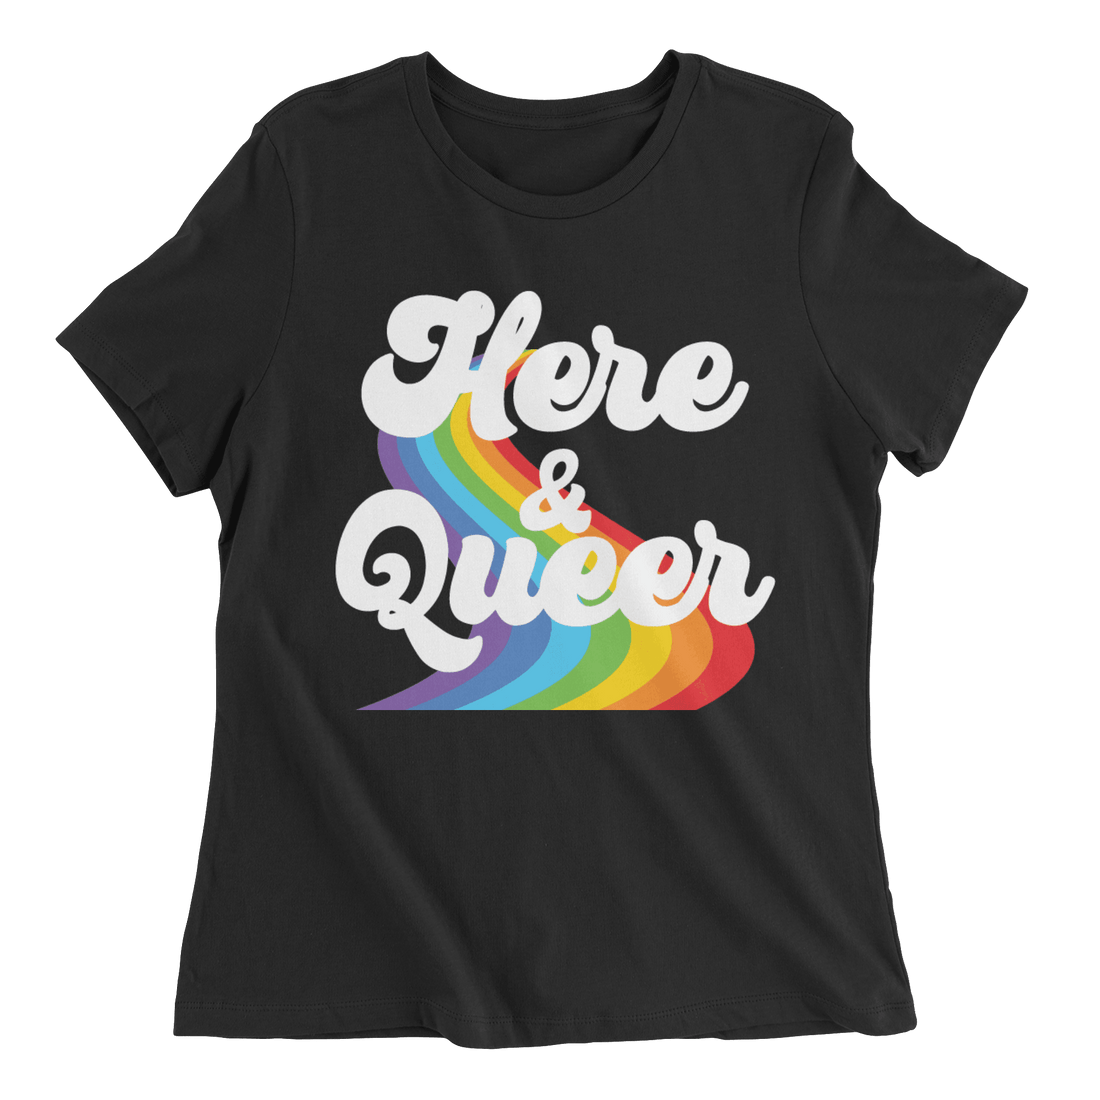 Here &amp; Queer - The T-Shirt Deli, Co.